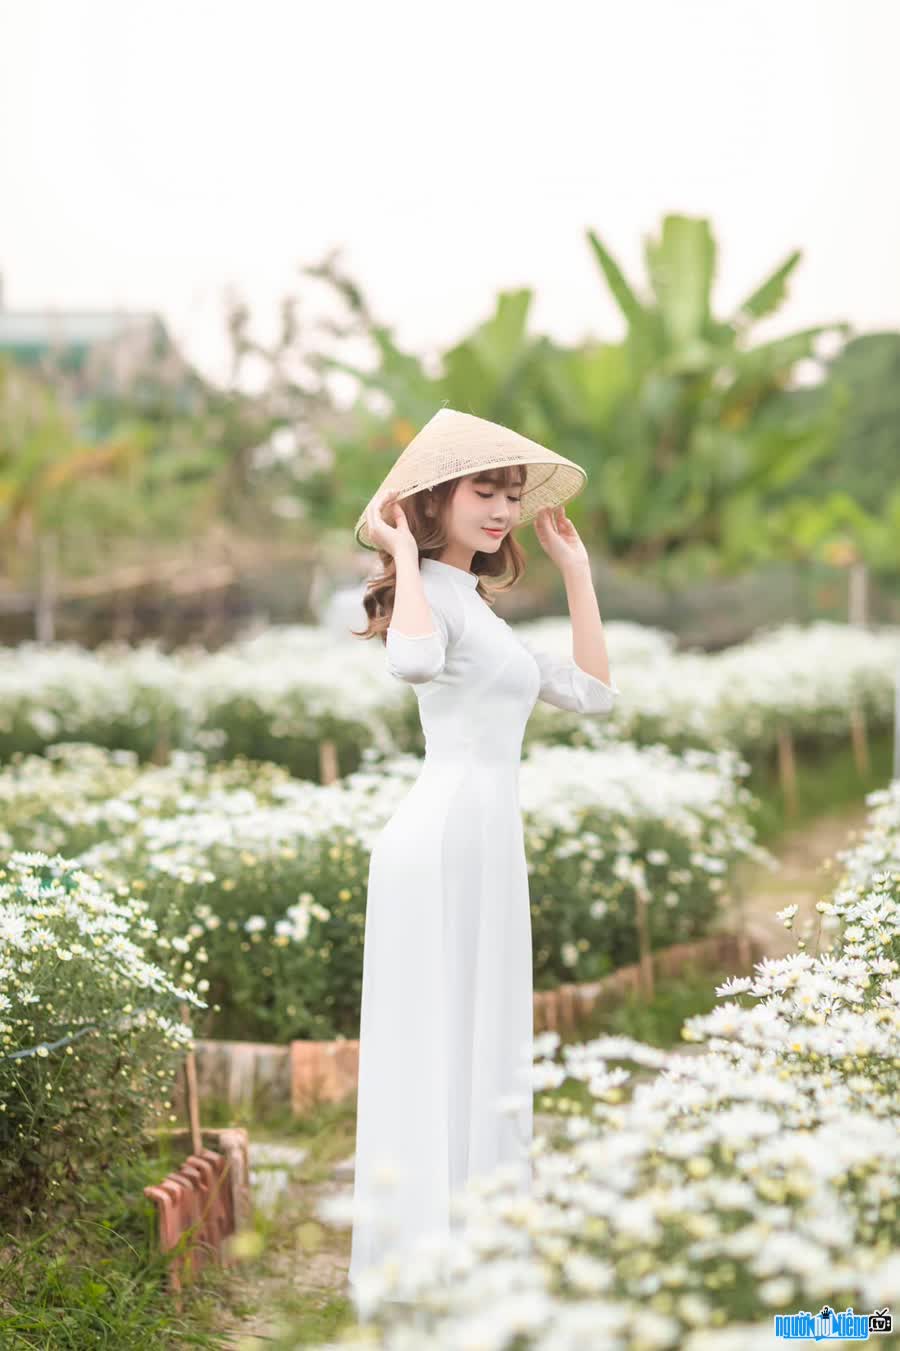 Thuy Dung shows off her gentle beauty in ao dai